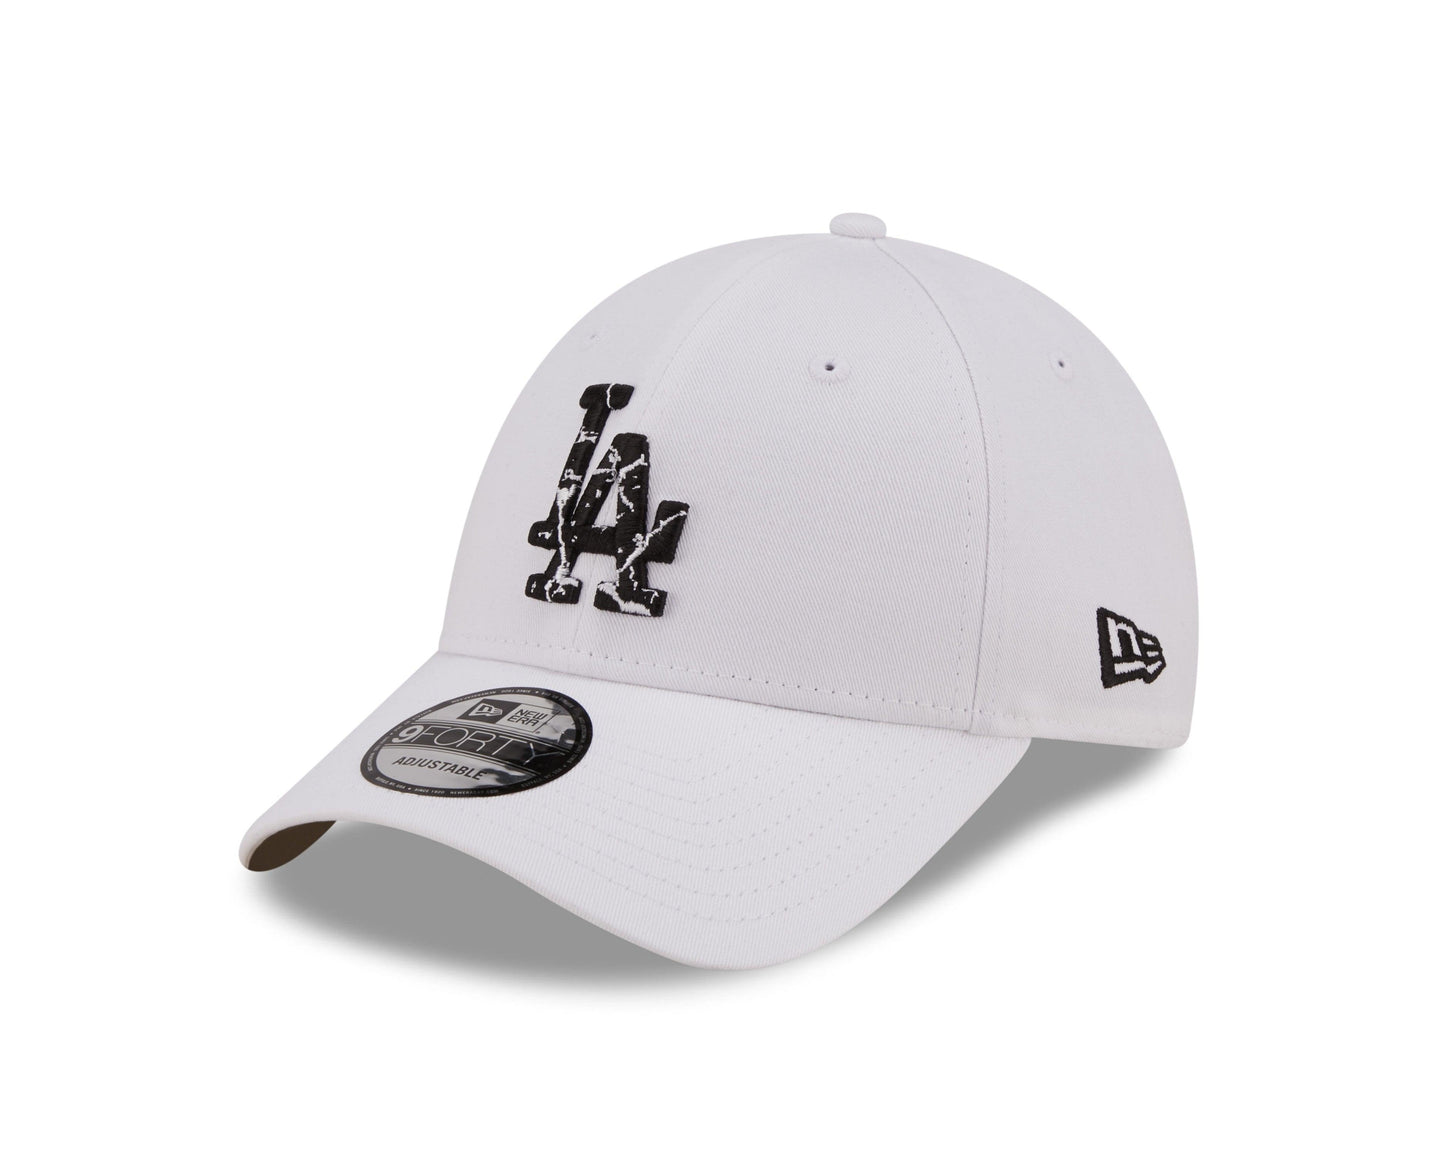 NEW ERA 9FORTY MLB INFILL LOS ANGELES DODGERS WHITE CAP